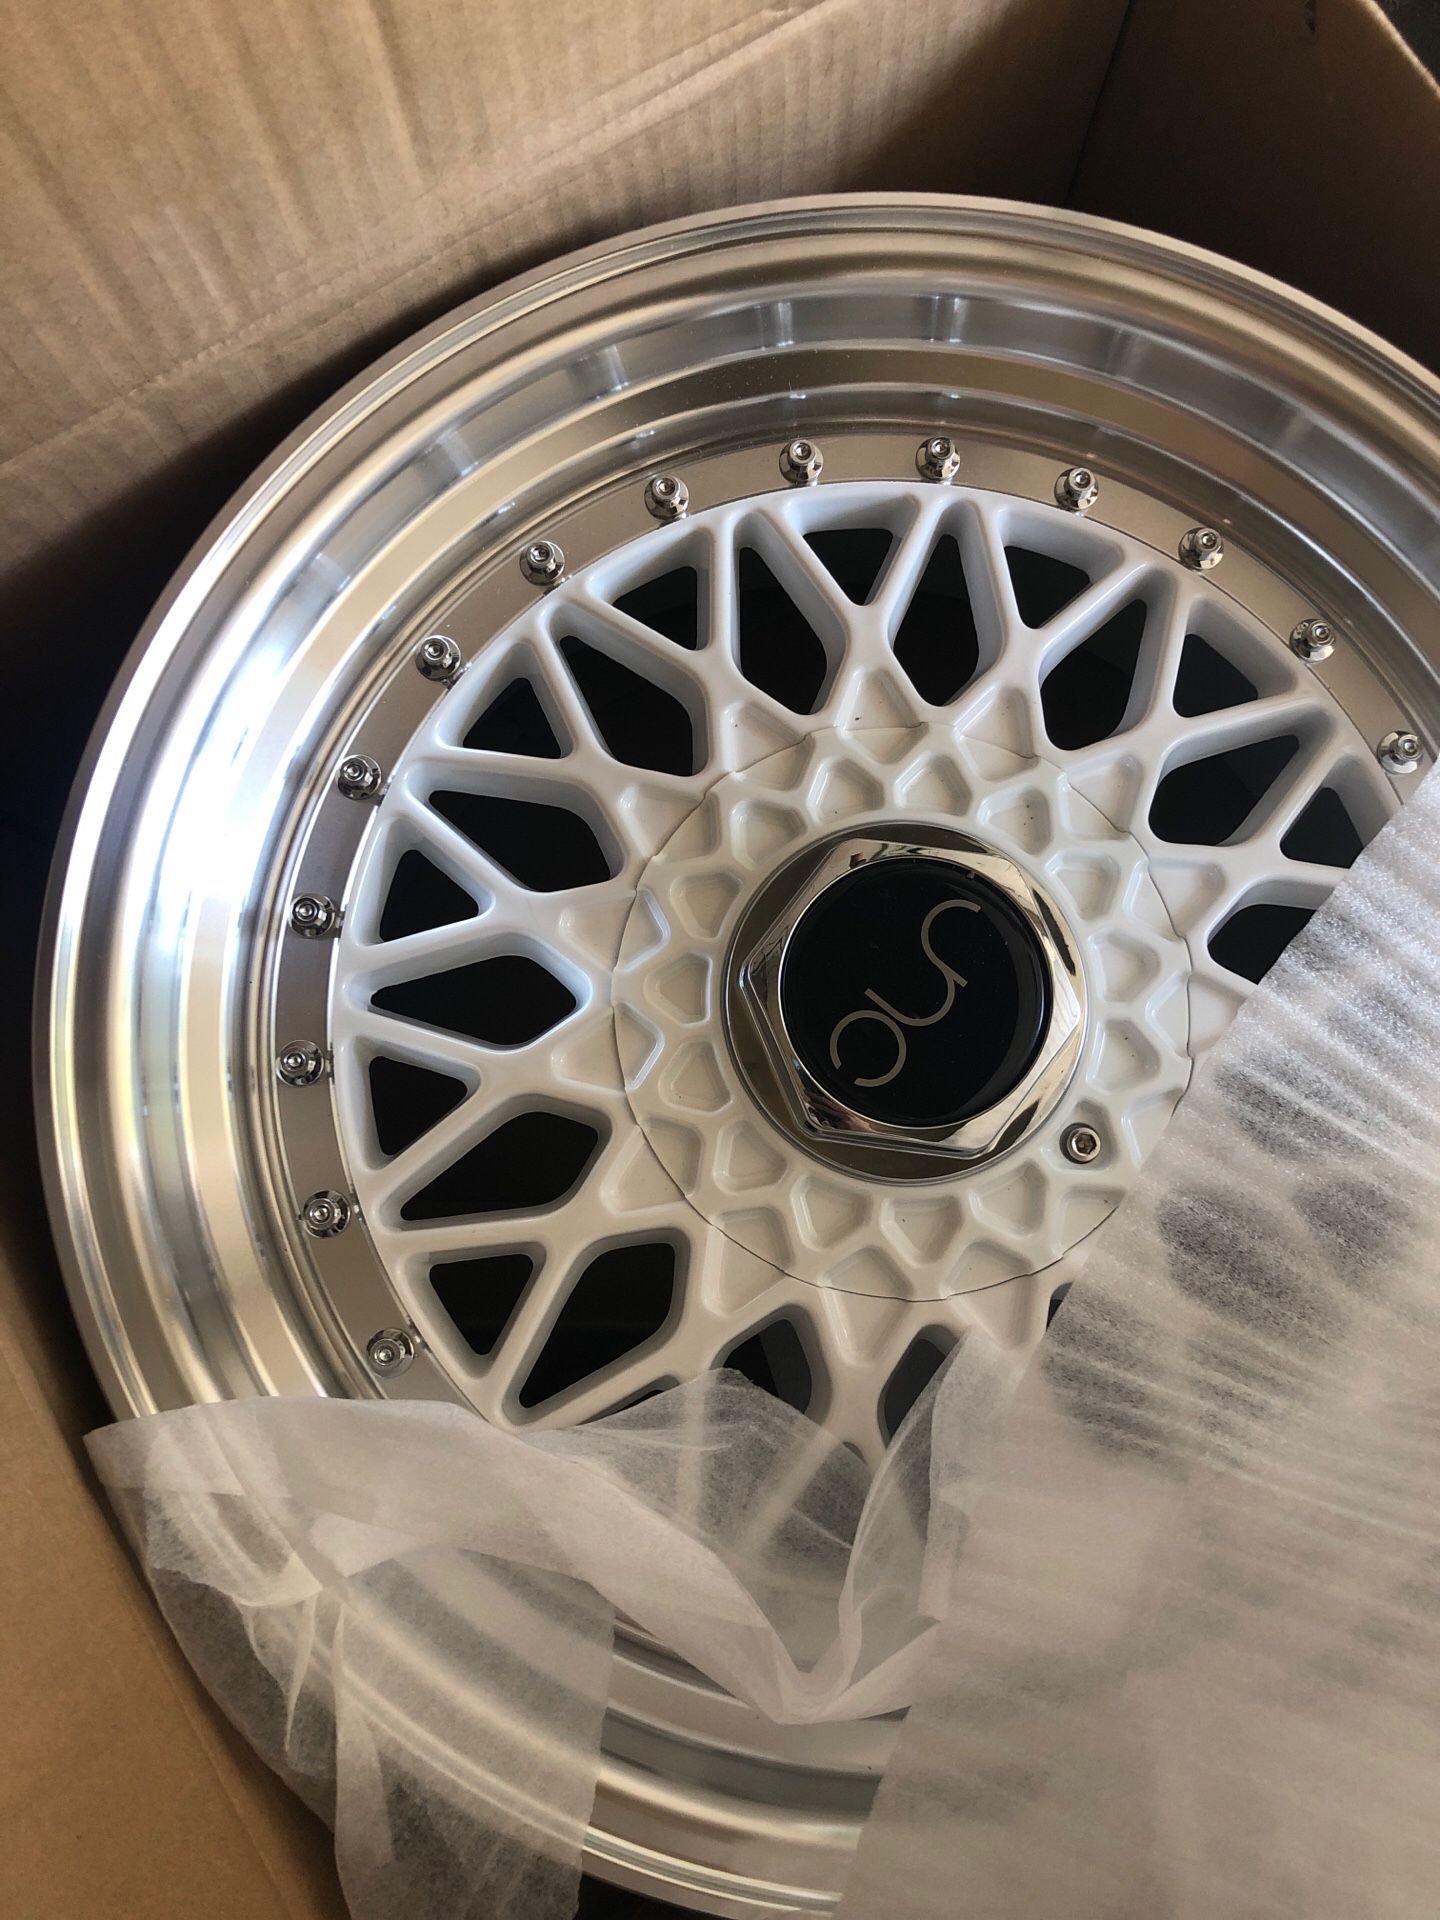 Jnc 16 inch rim only 1 the others sold